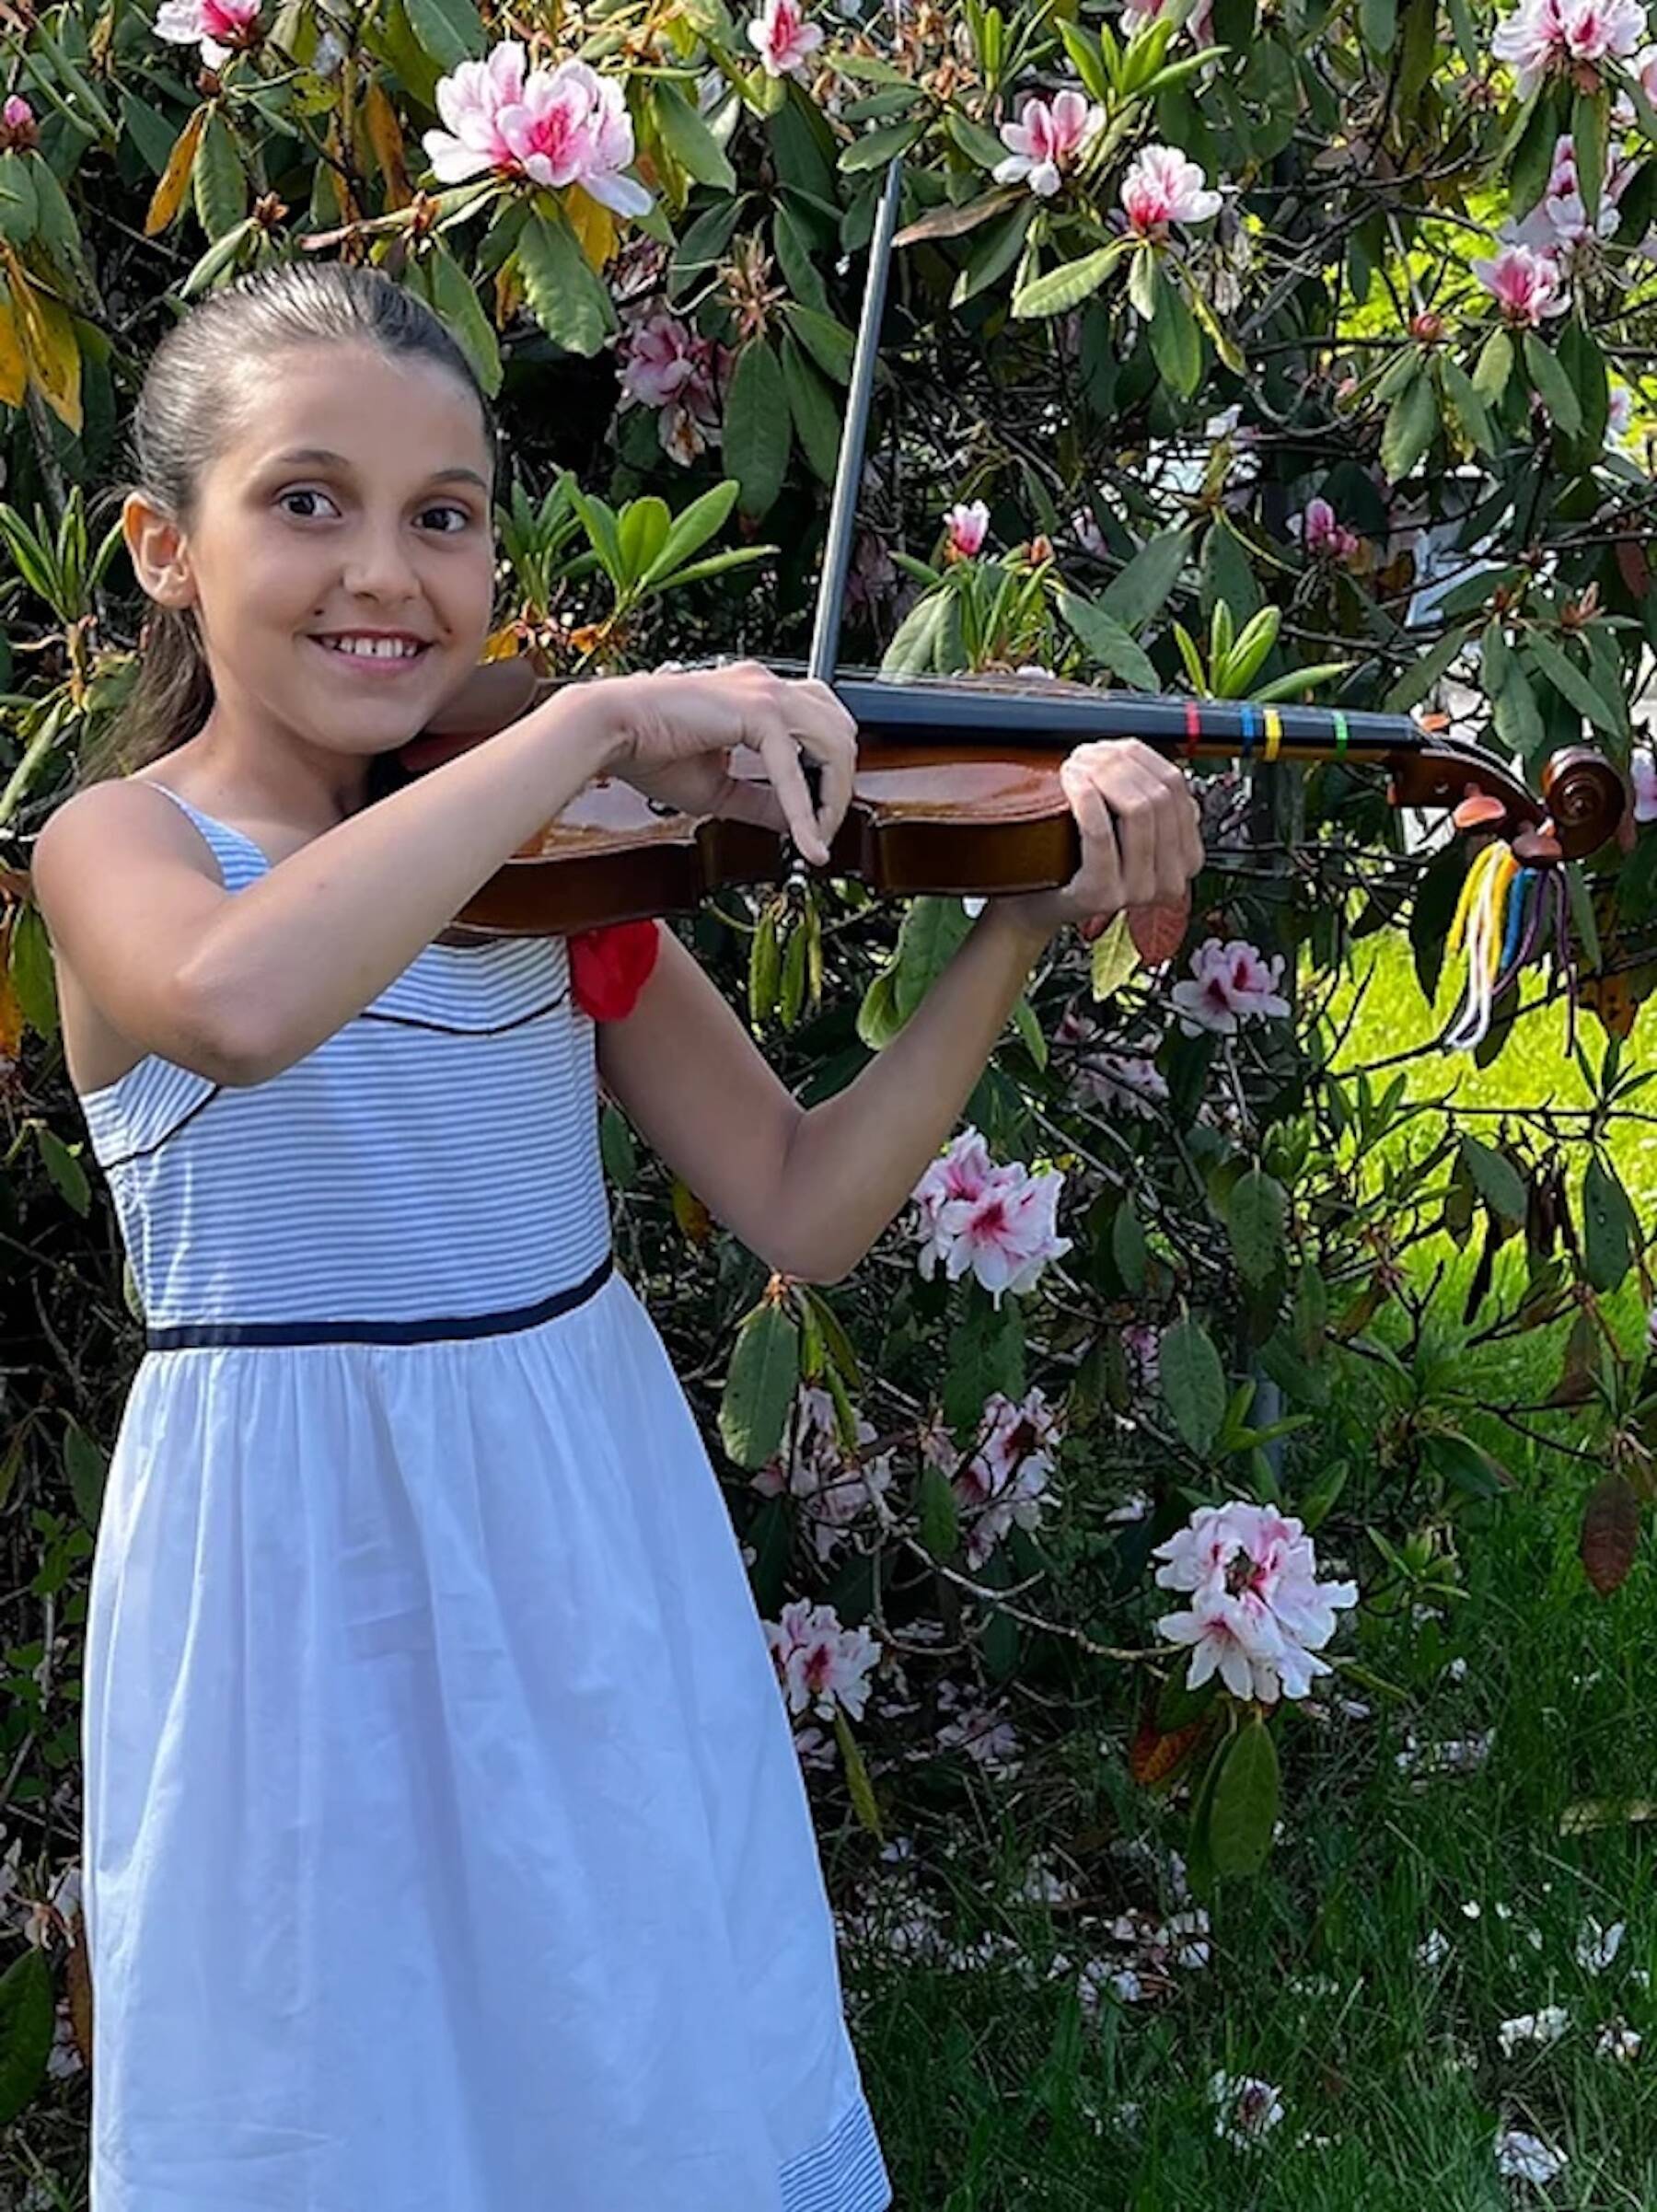 Photo courtesy of Music on the Strait
Ocean Sains of Port Angeles, then in fourth grade, was among the younger recipients of Music on the Strait’s 2022 Alice Rapasky Scholarship.